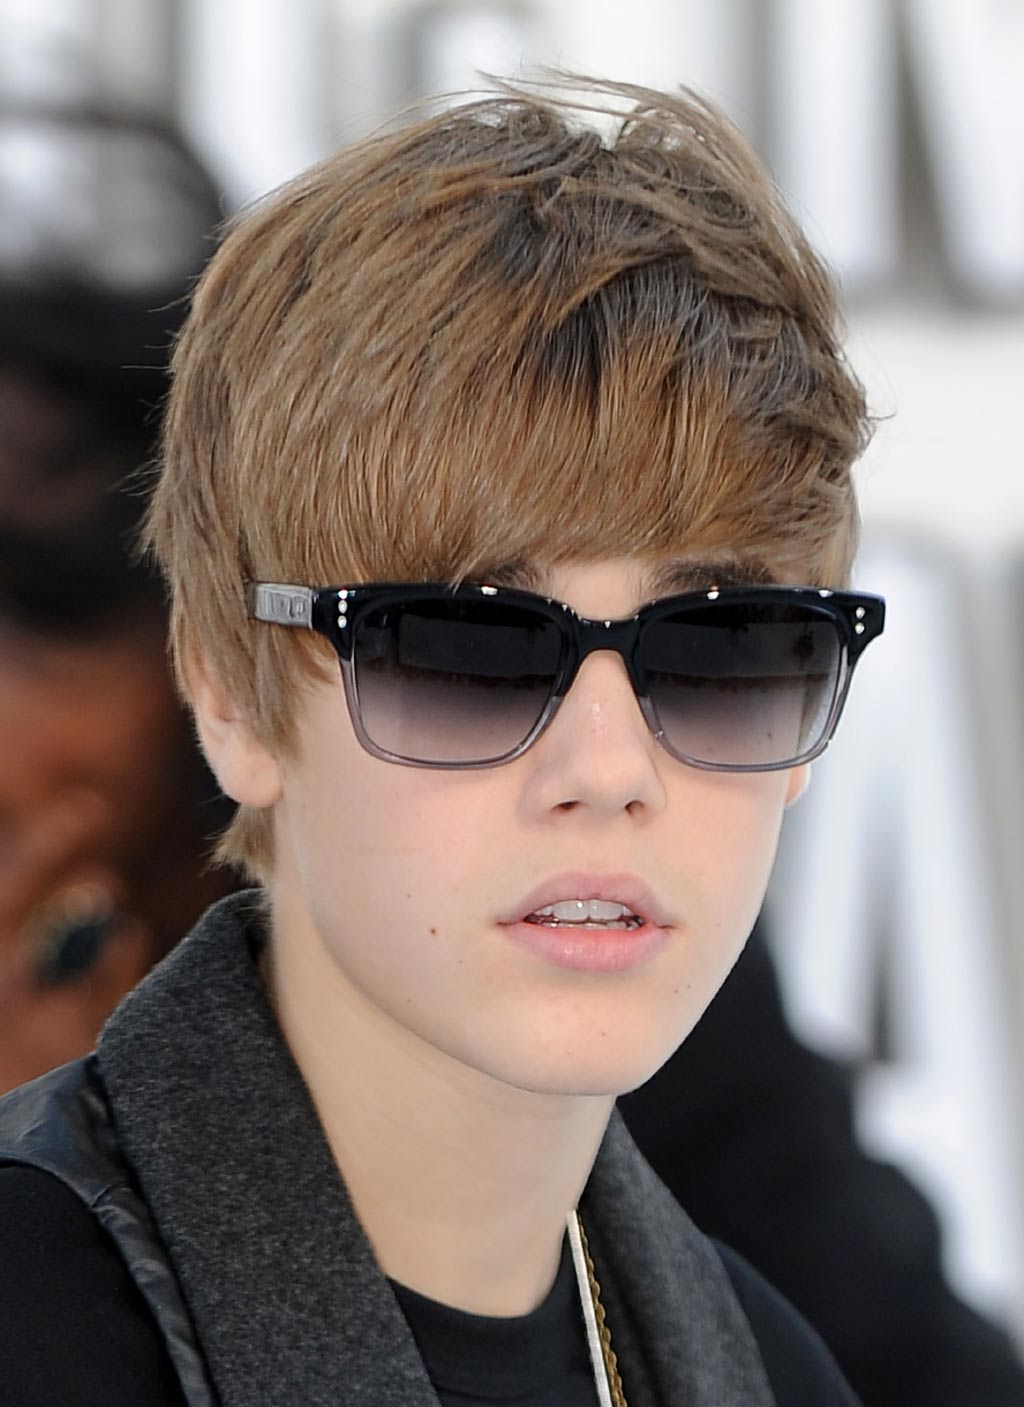 Justin Bieber Singer Profile and New Photos-Images 2012 | Hollywood1024 x 1407